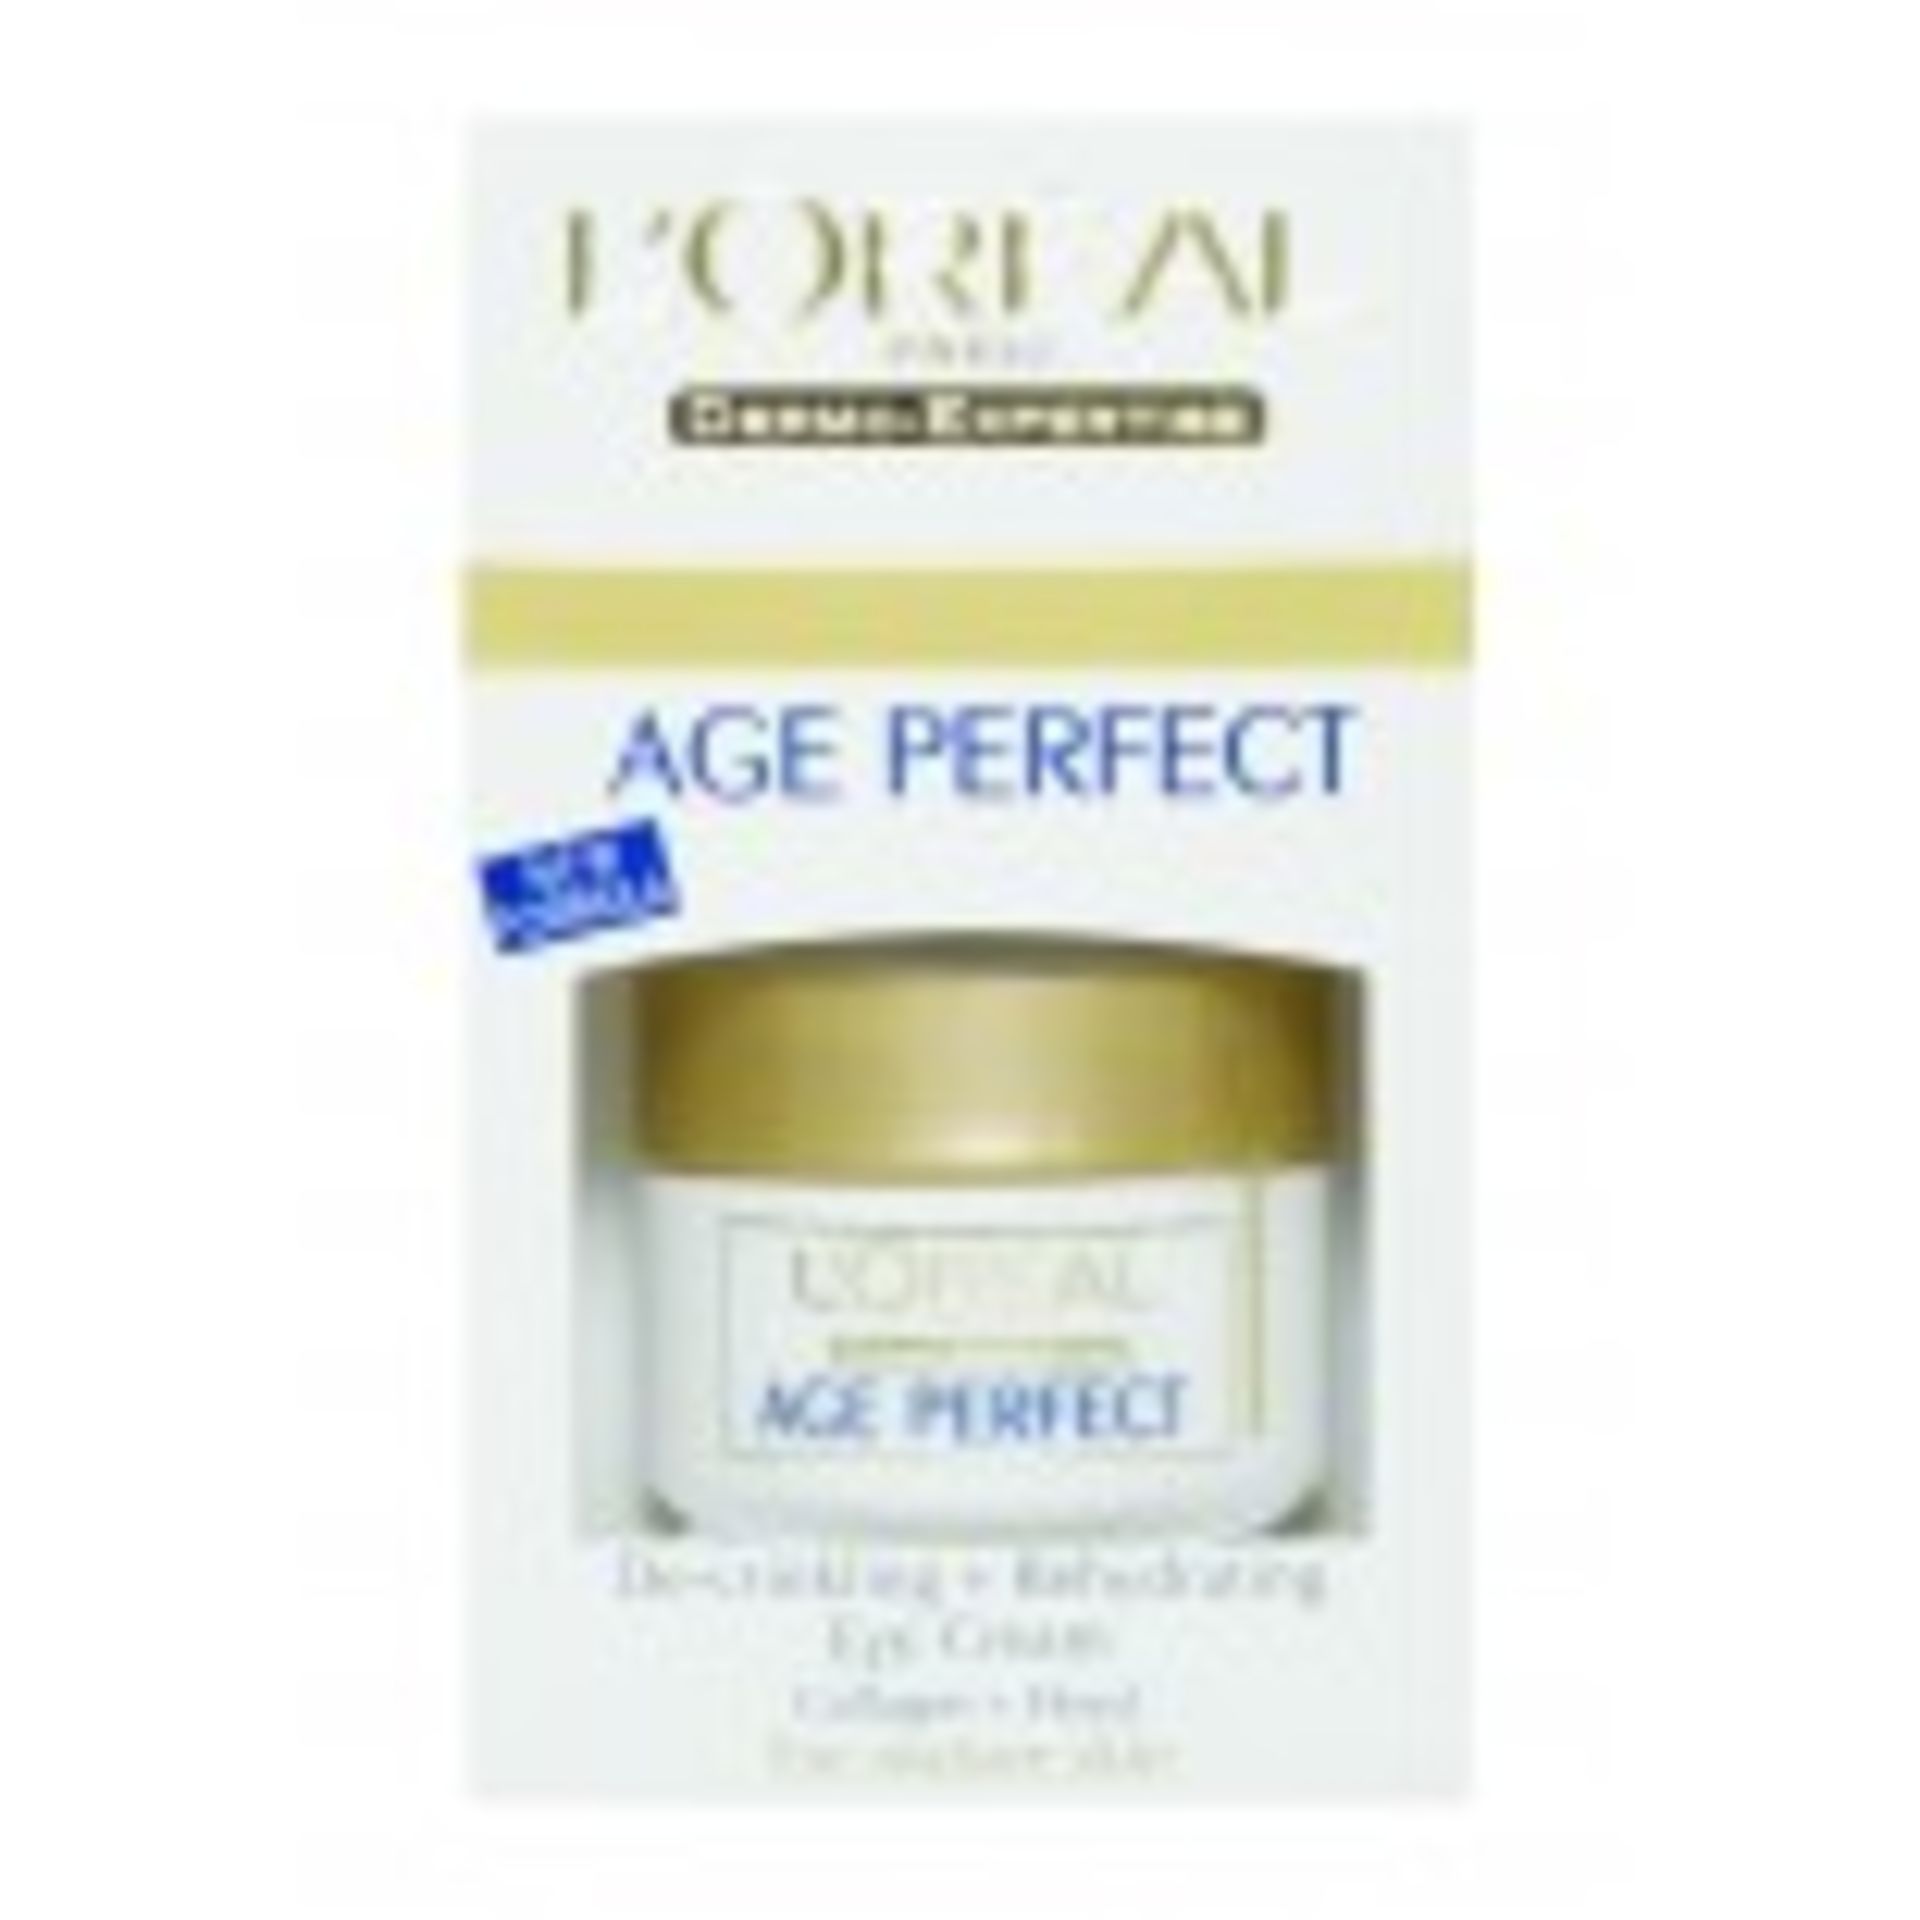 V L'Oreal Dermo-Expertise Age Perfect Eye cream mature skin - Image 3 of 4